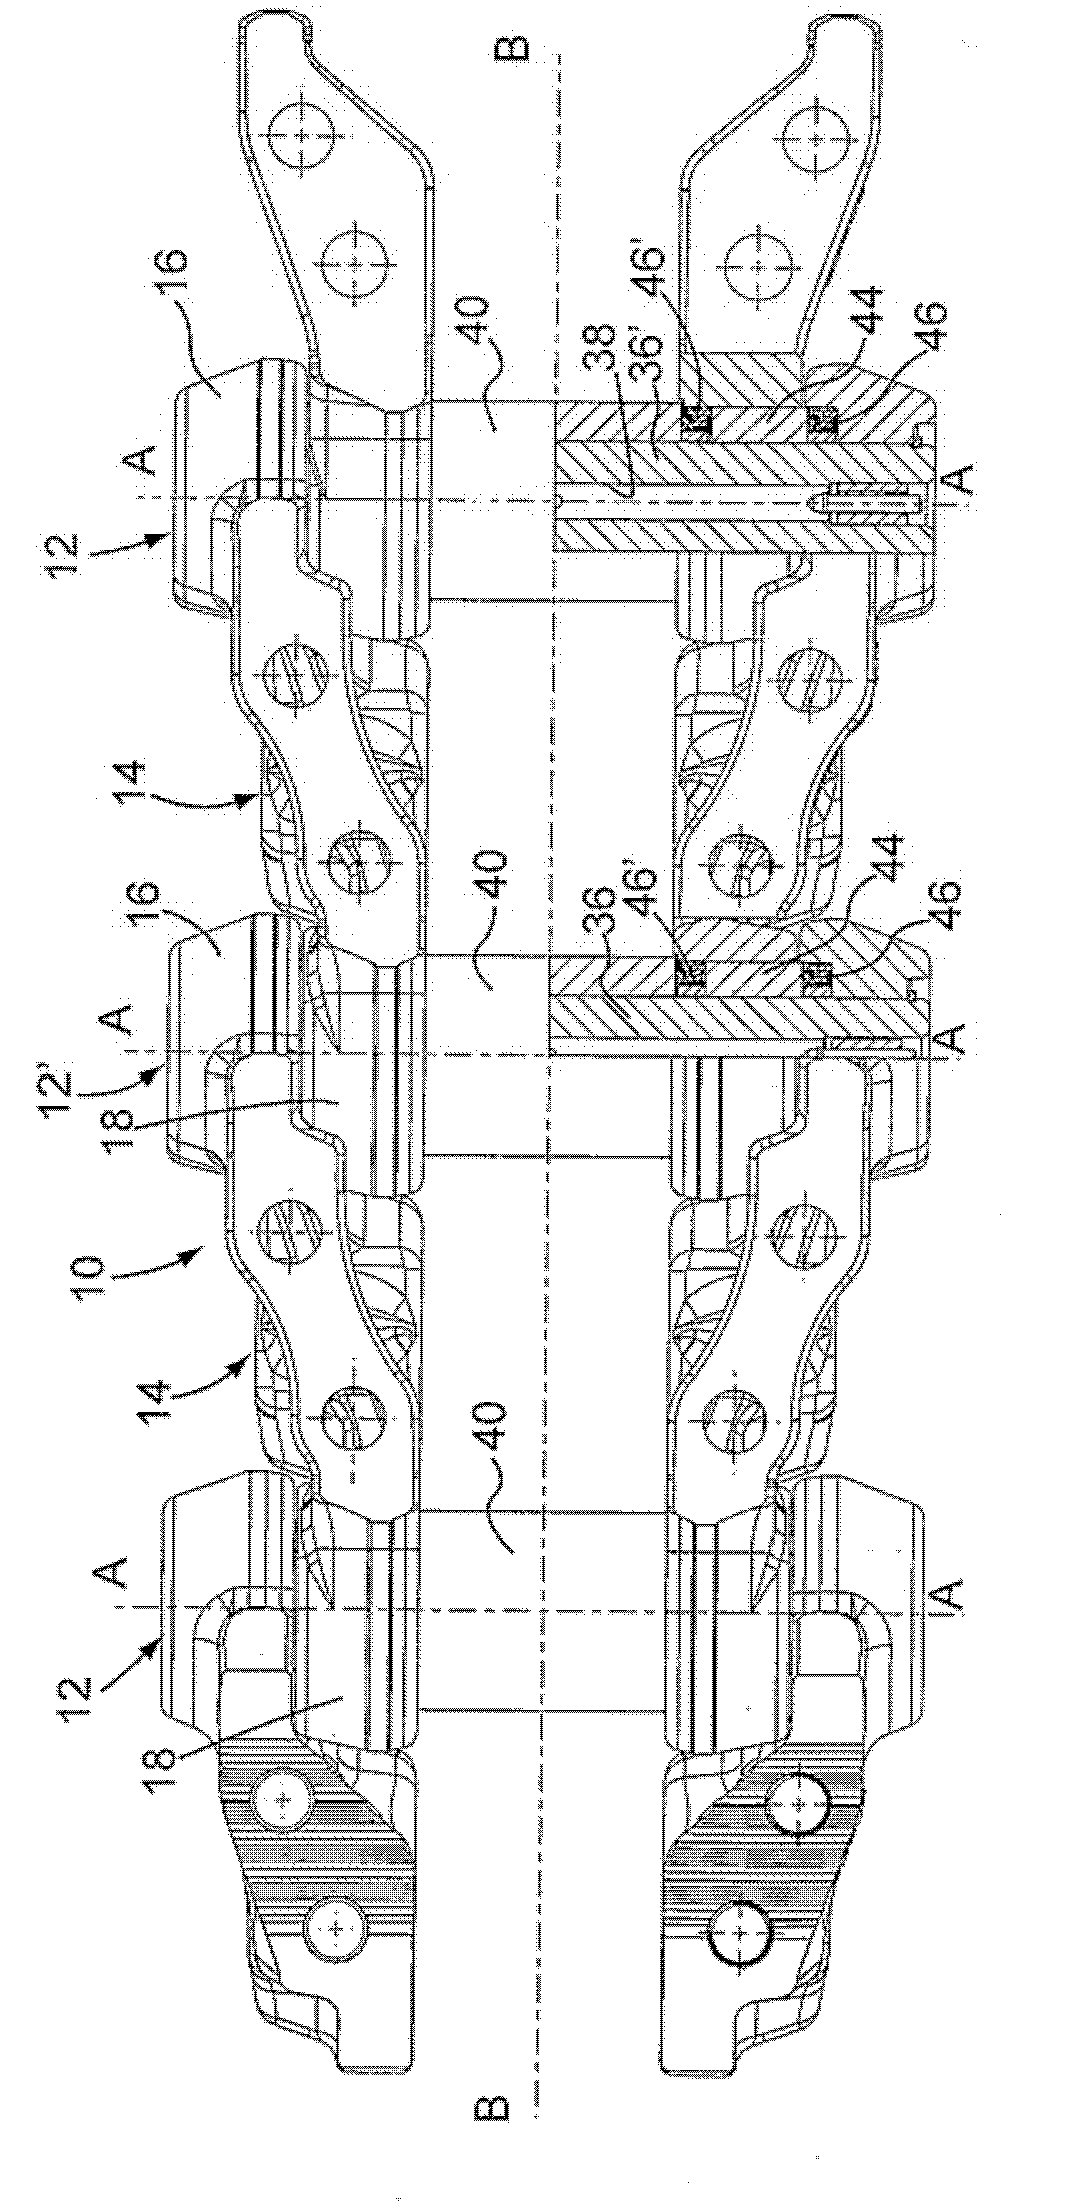 Track with rotating bushings for track-type vehicles